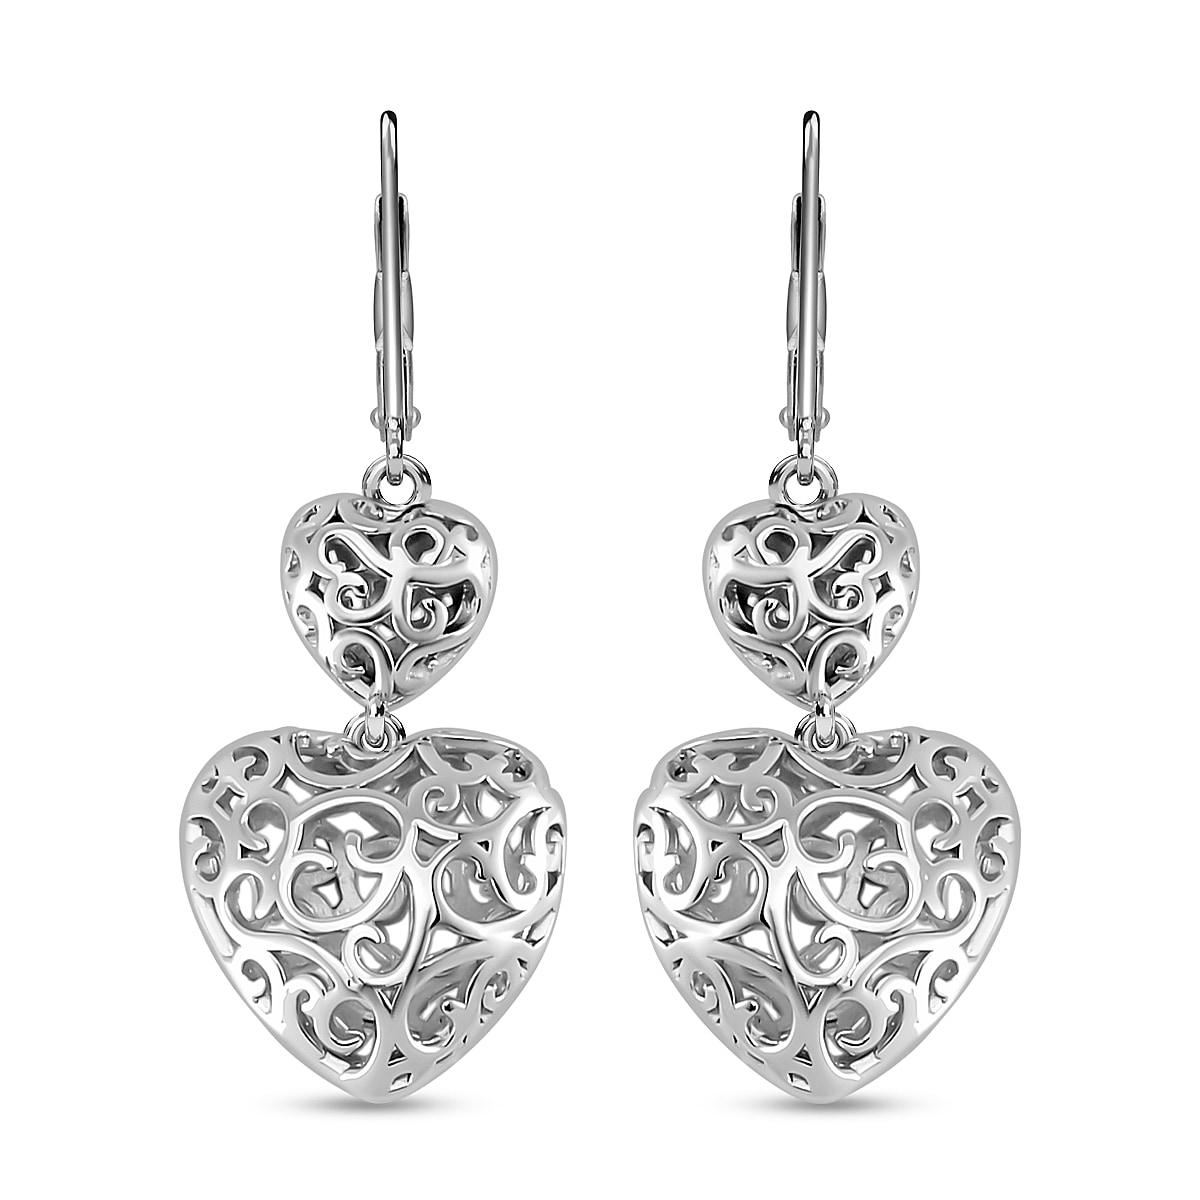 LUCY Q Amore Collection - Rhodium Overlay Sterling Silver Earrings